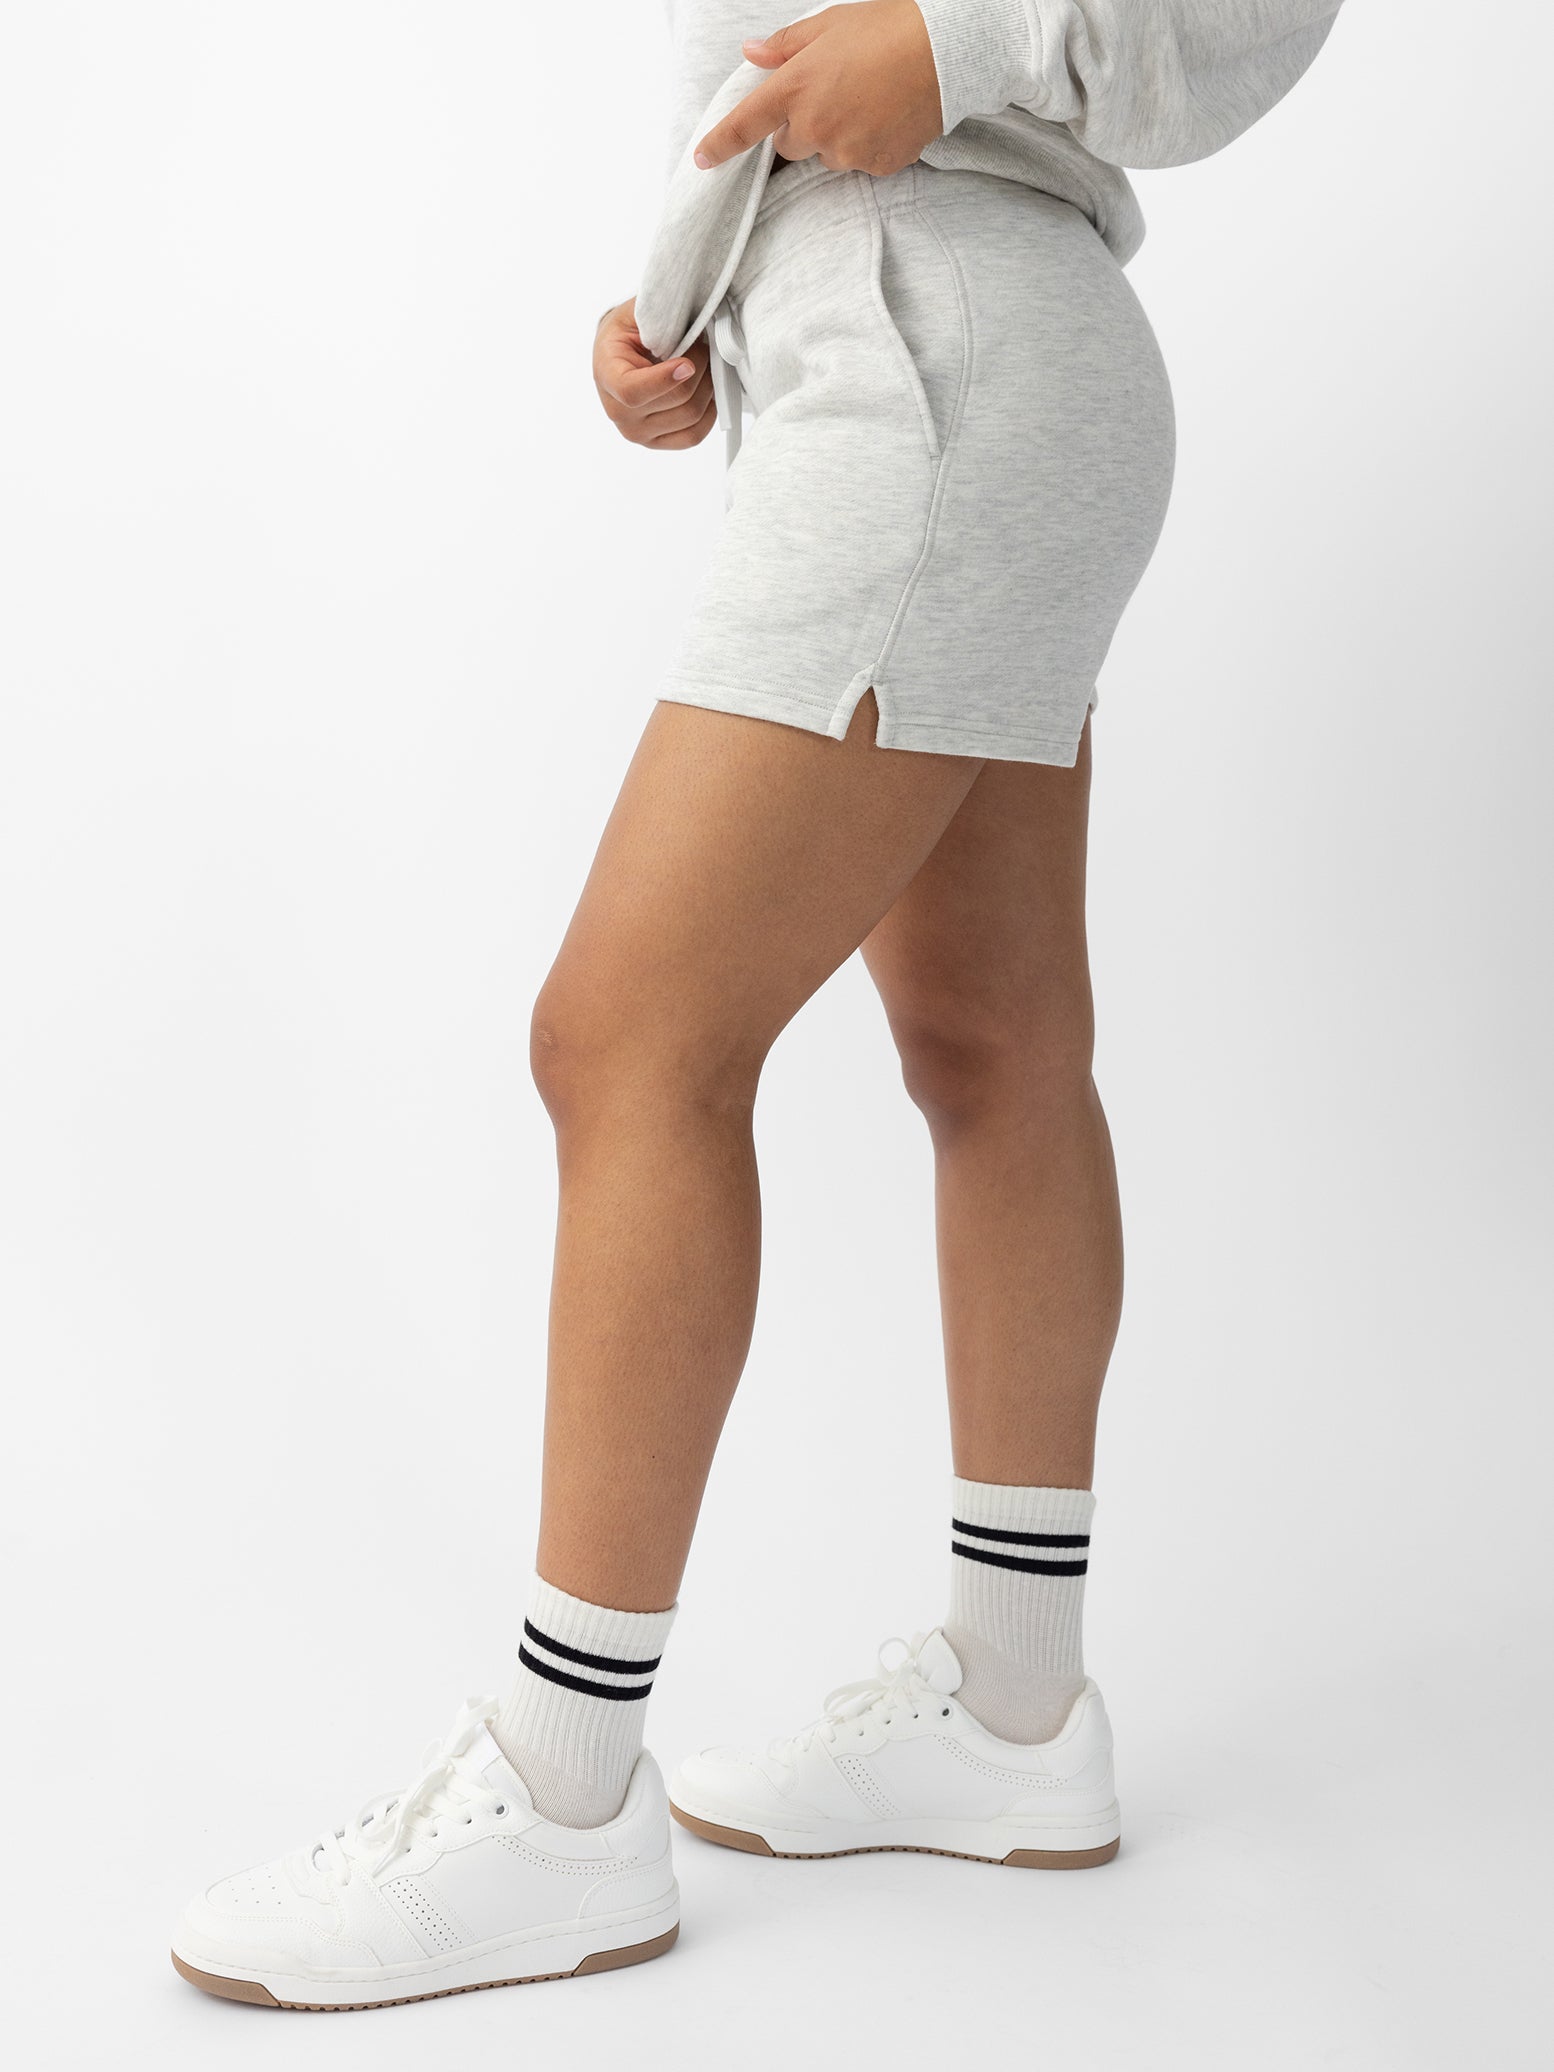 Heather Grey CityScape Shorts. The shorts are being worn by a female model in skate shoes. The background it a white background. 